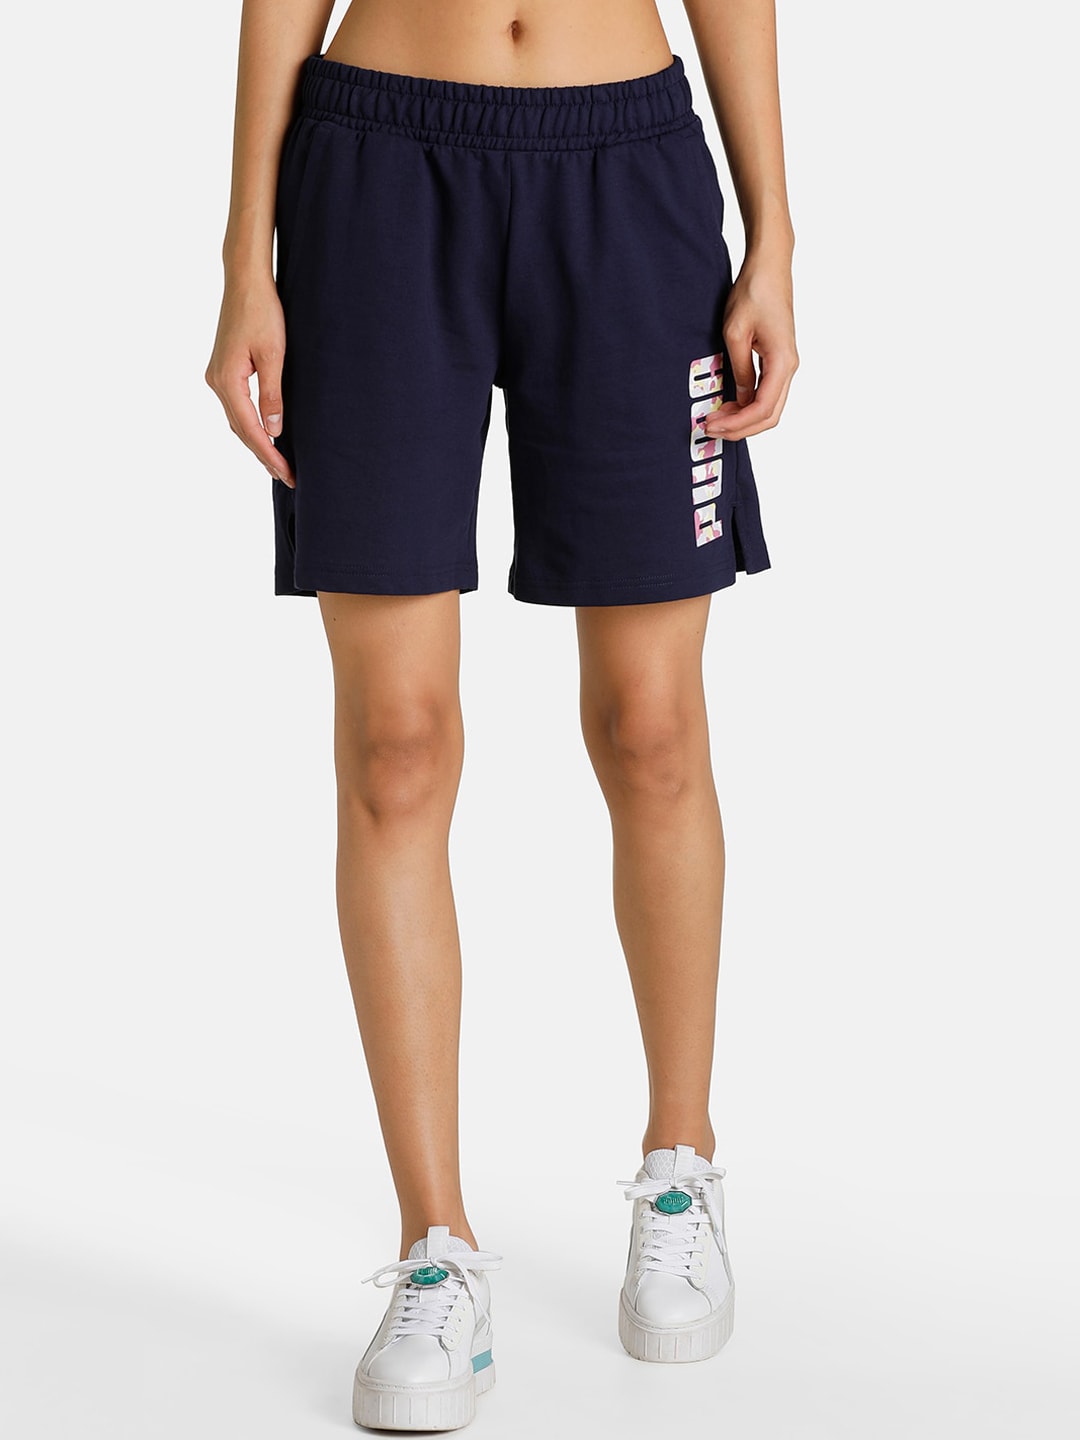 Puma Women Blue Loose Fit Sports Shorts Price in India